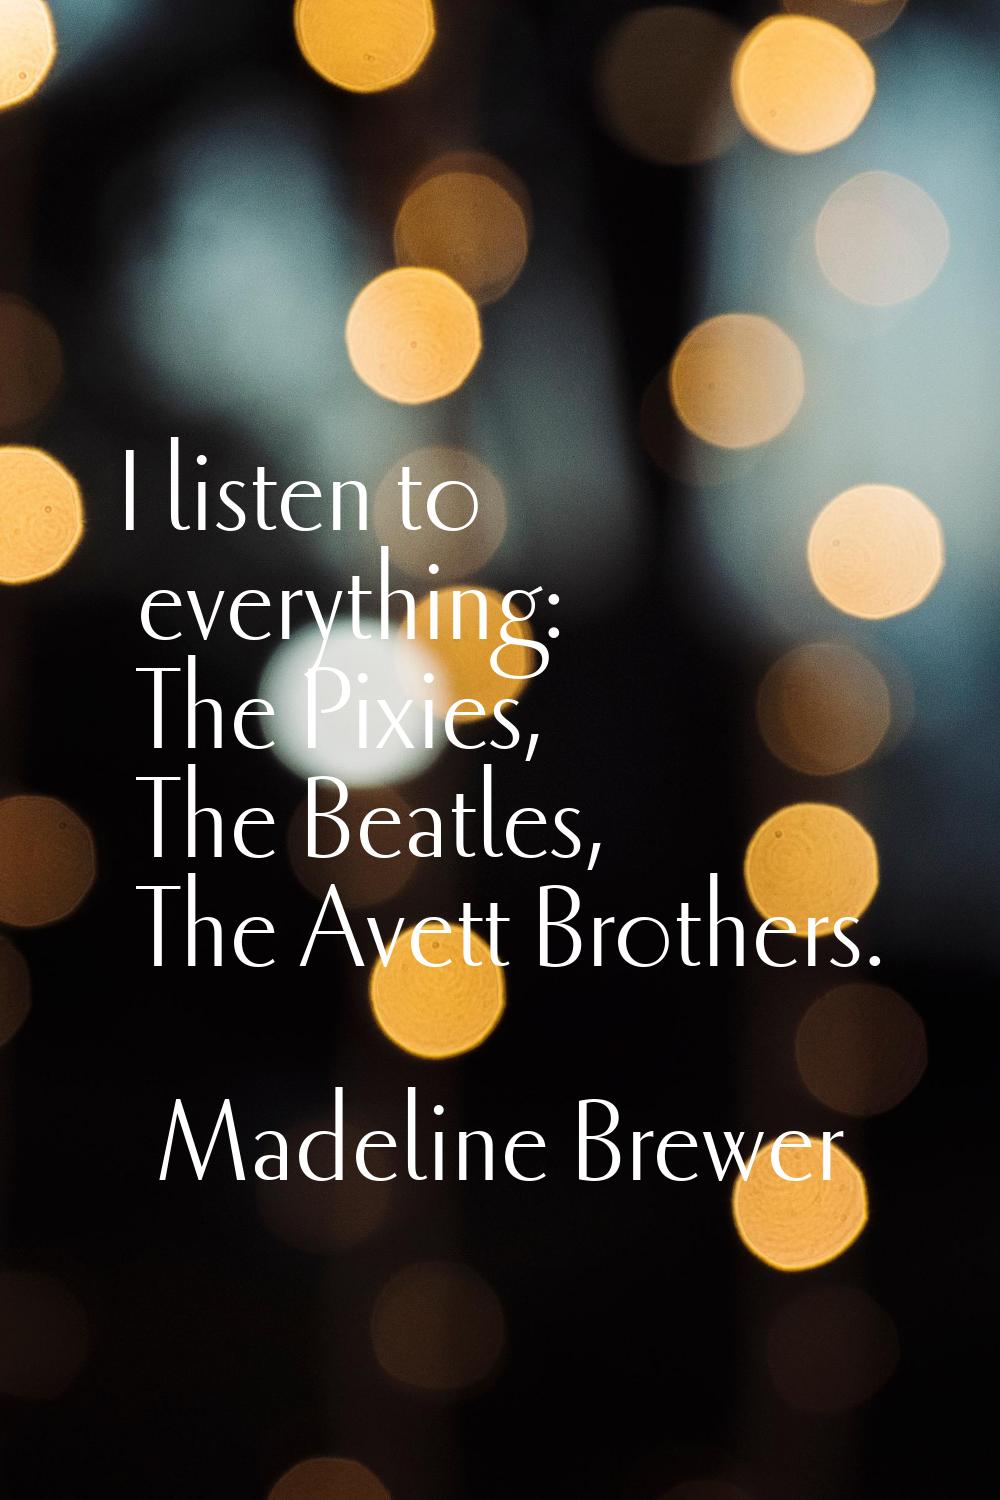 I listen to everything: The Pixies, The Beatles, The Avett Brothers.